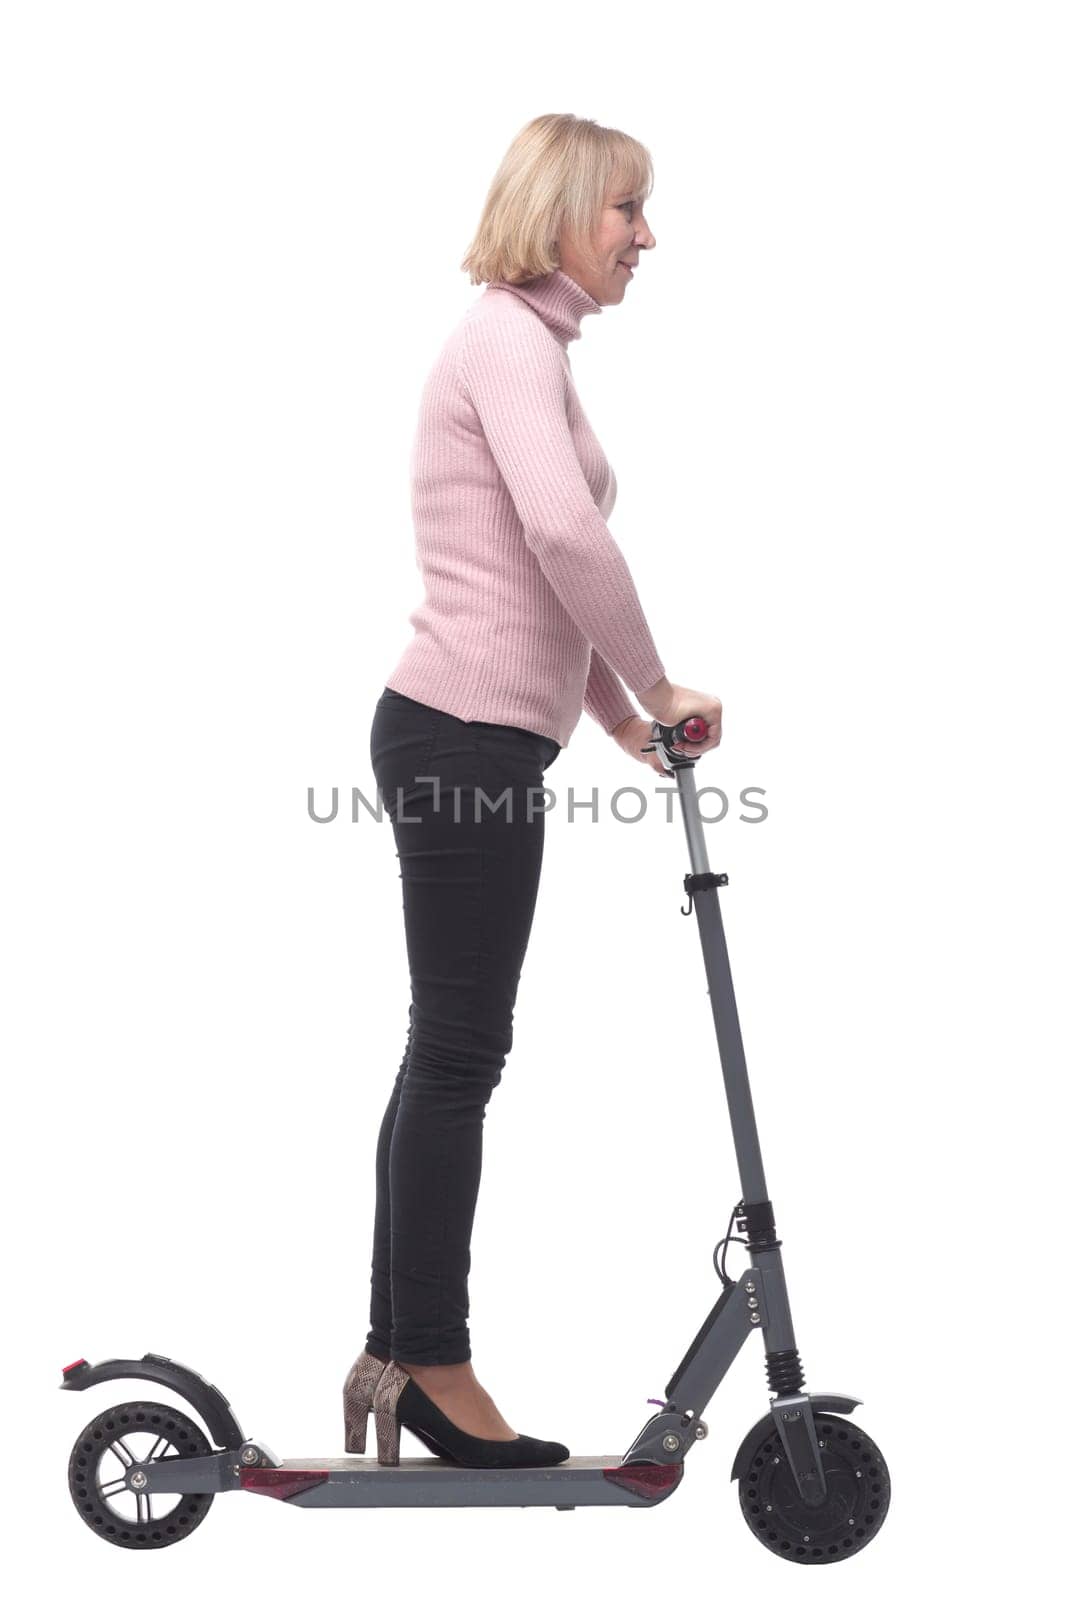 Beautiful woman riding an electric scooter isolated on white background and looking at camera and smiling